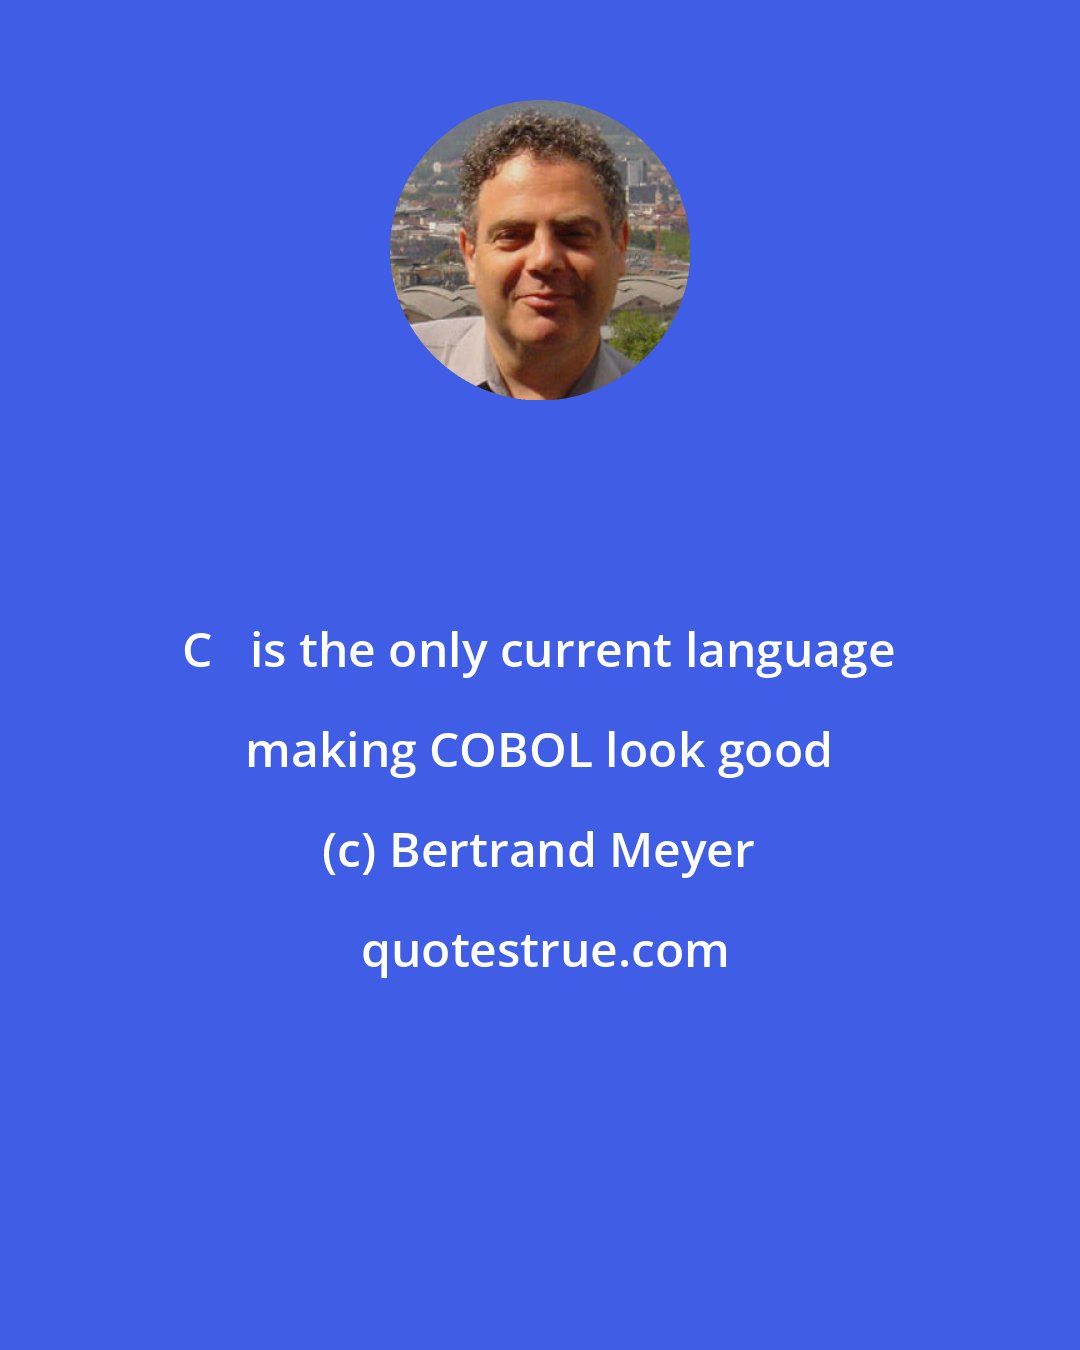 Bertrand Meyer: C++ is the only current language making COBOL look good